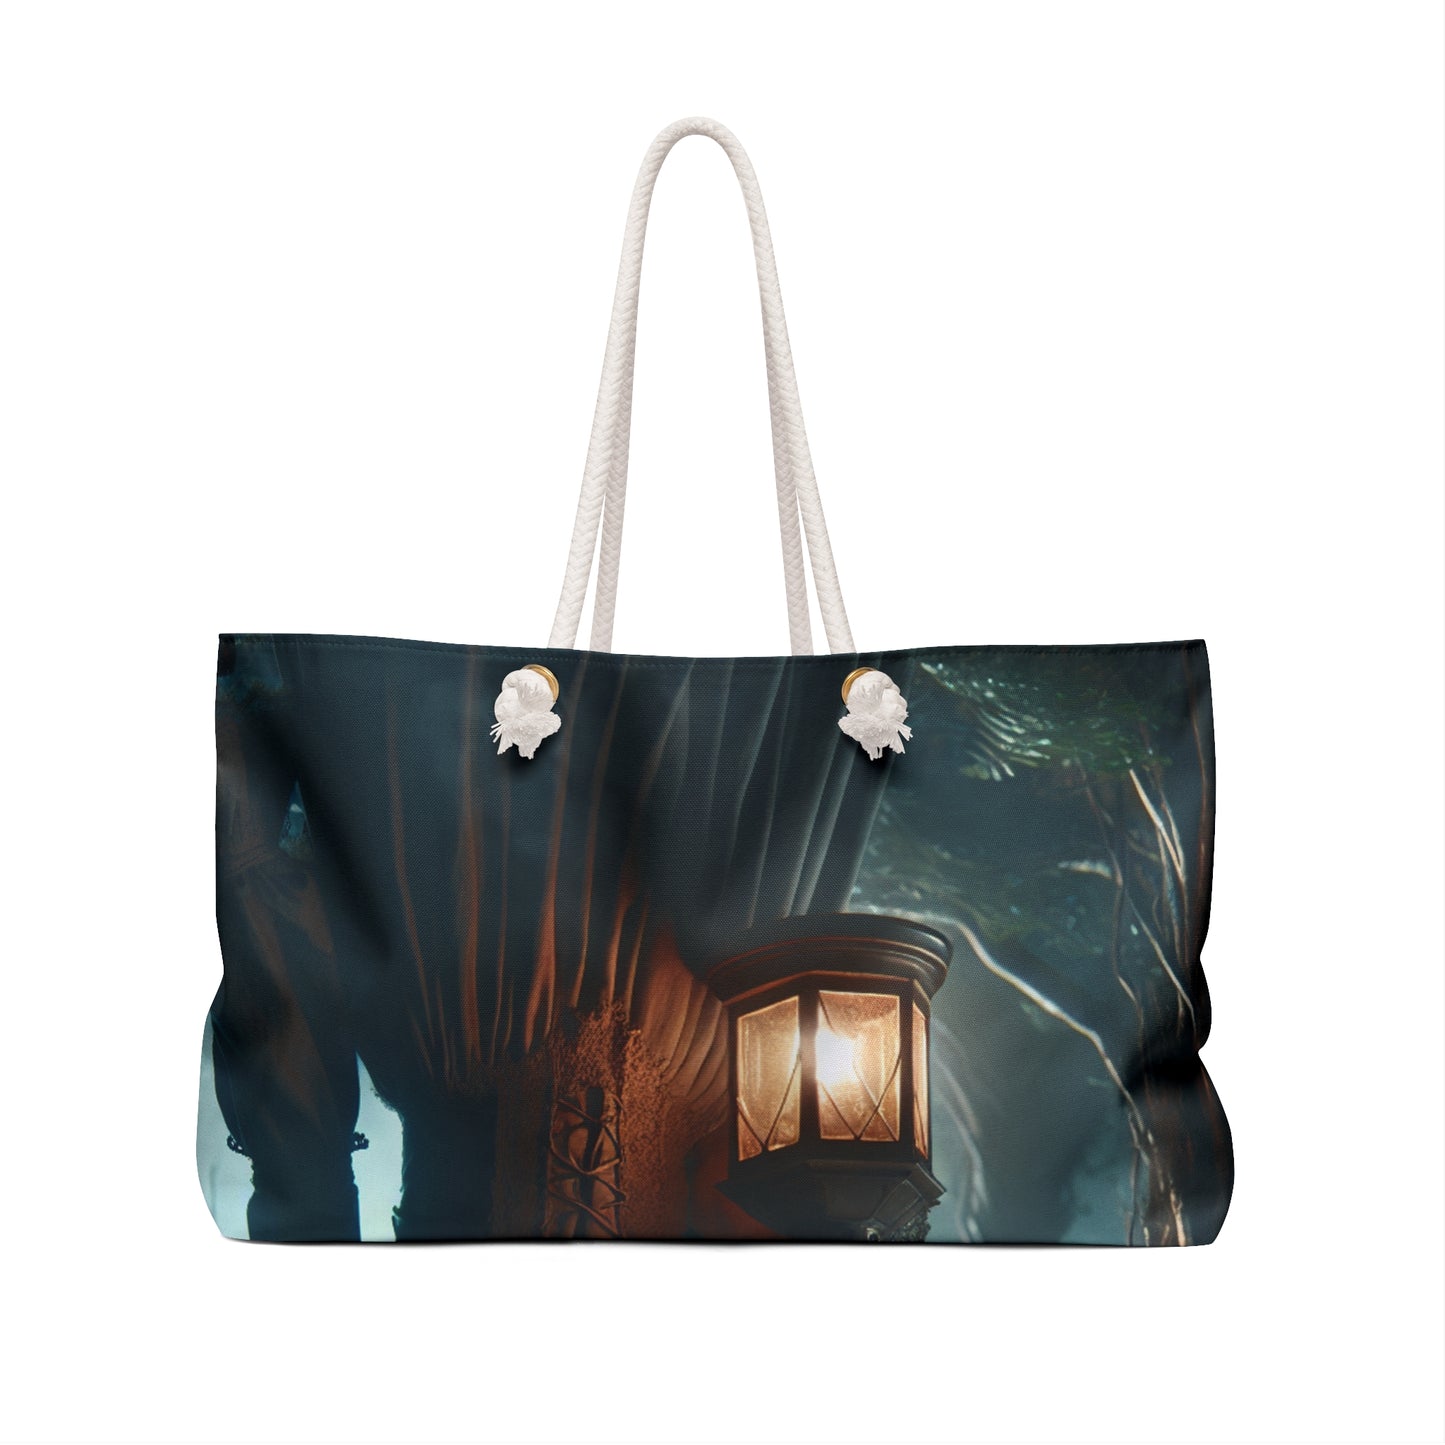 "Ready for Battle in the Twisted Woods" - The Alien Weekender Bag Gothic Art Style